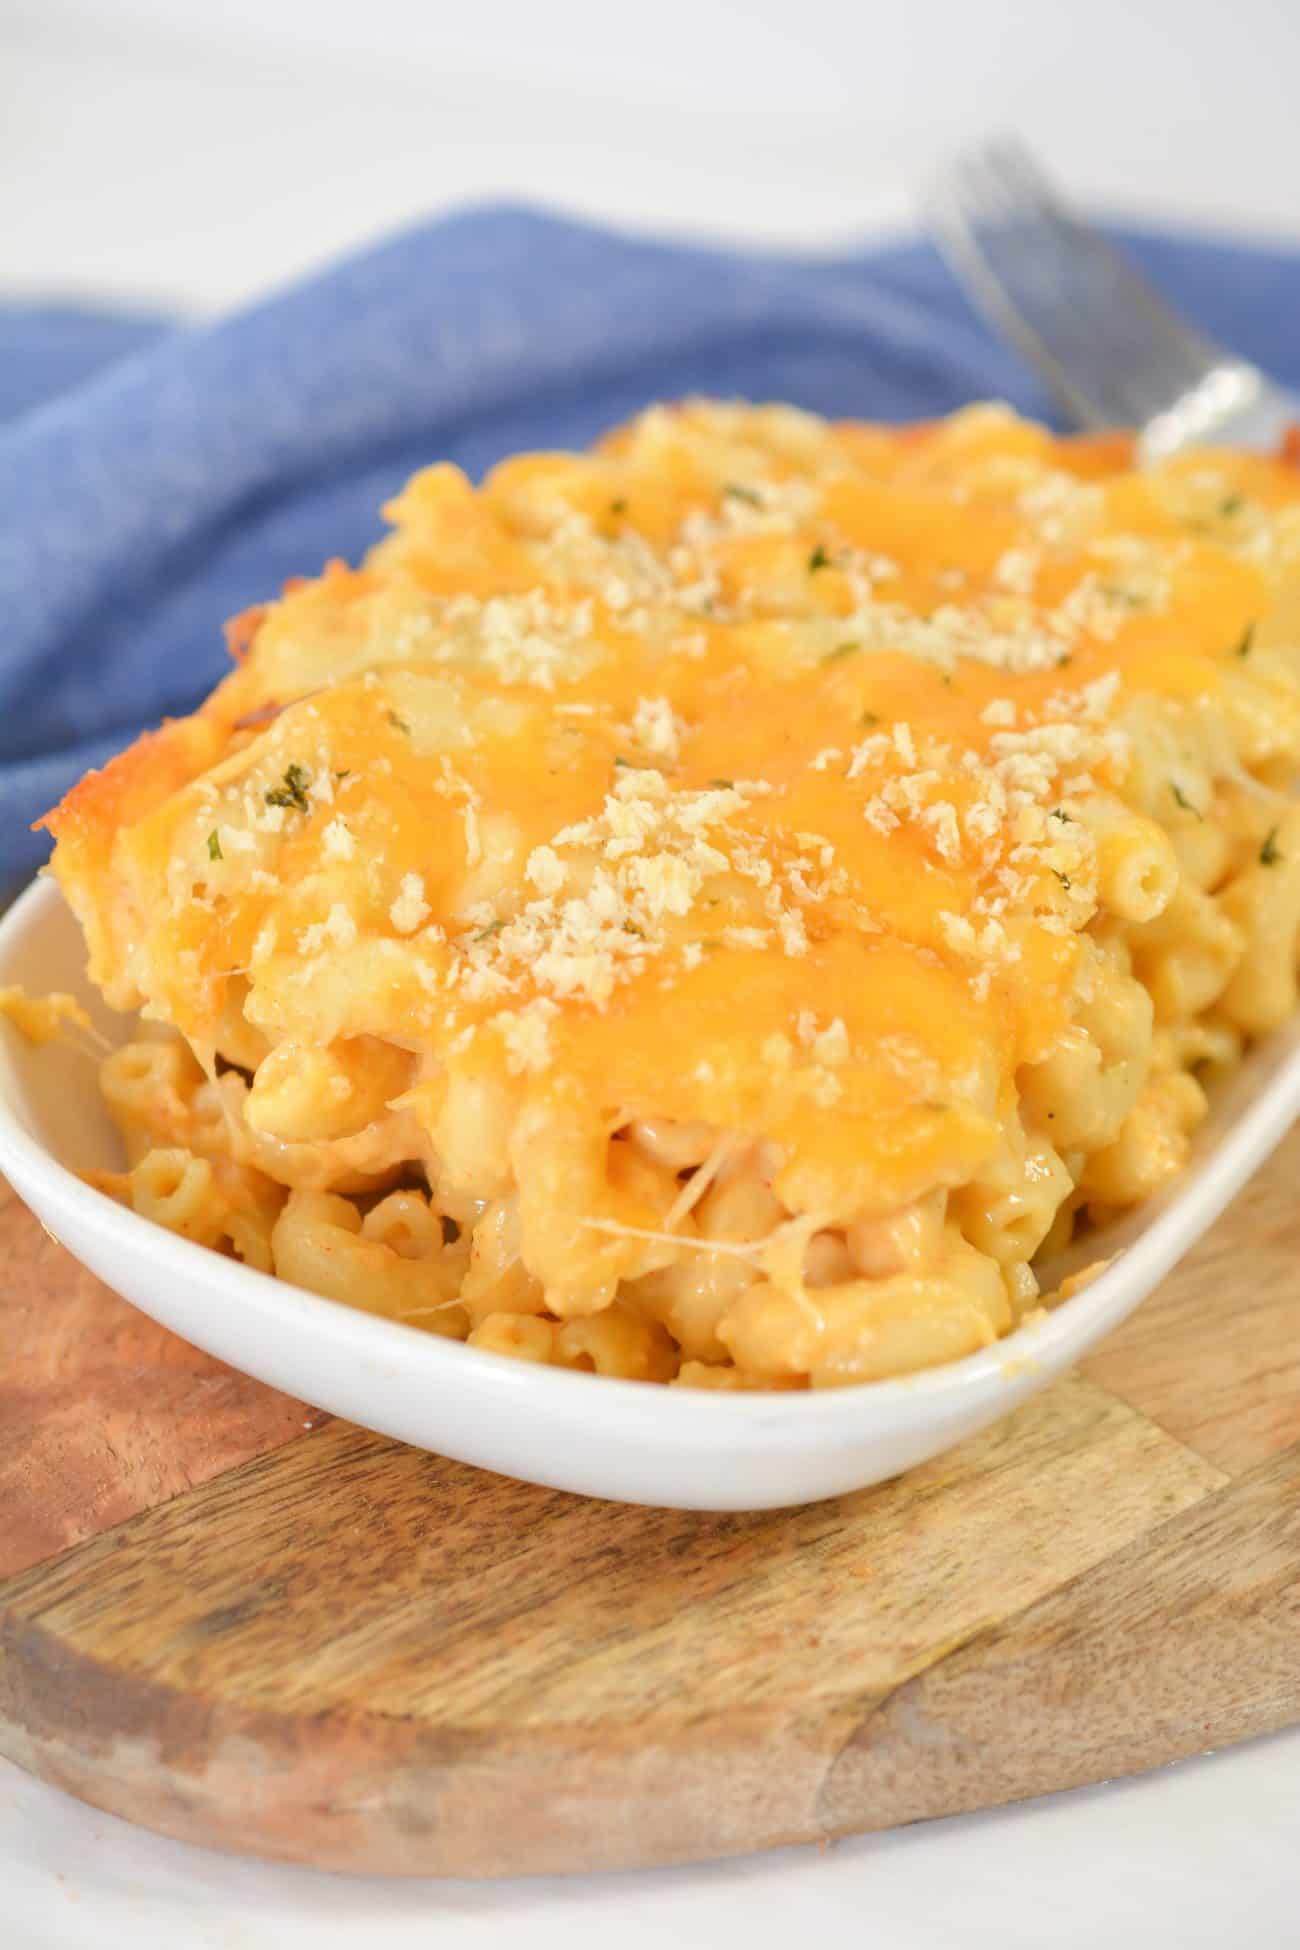 homemade macaroni and cheese recipe with whipping cream